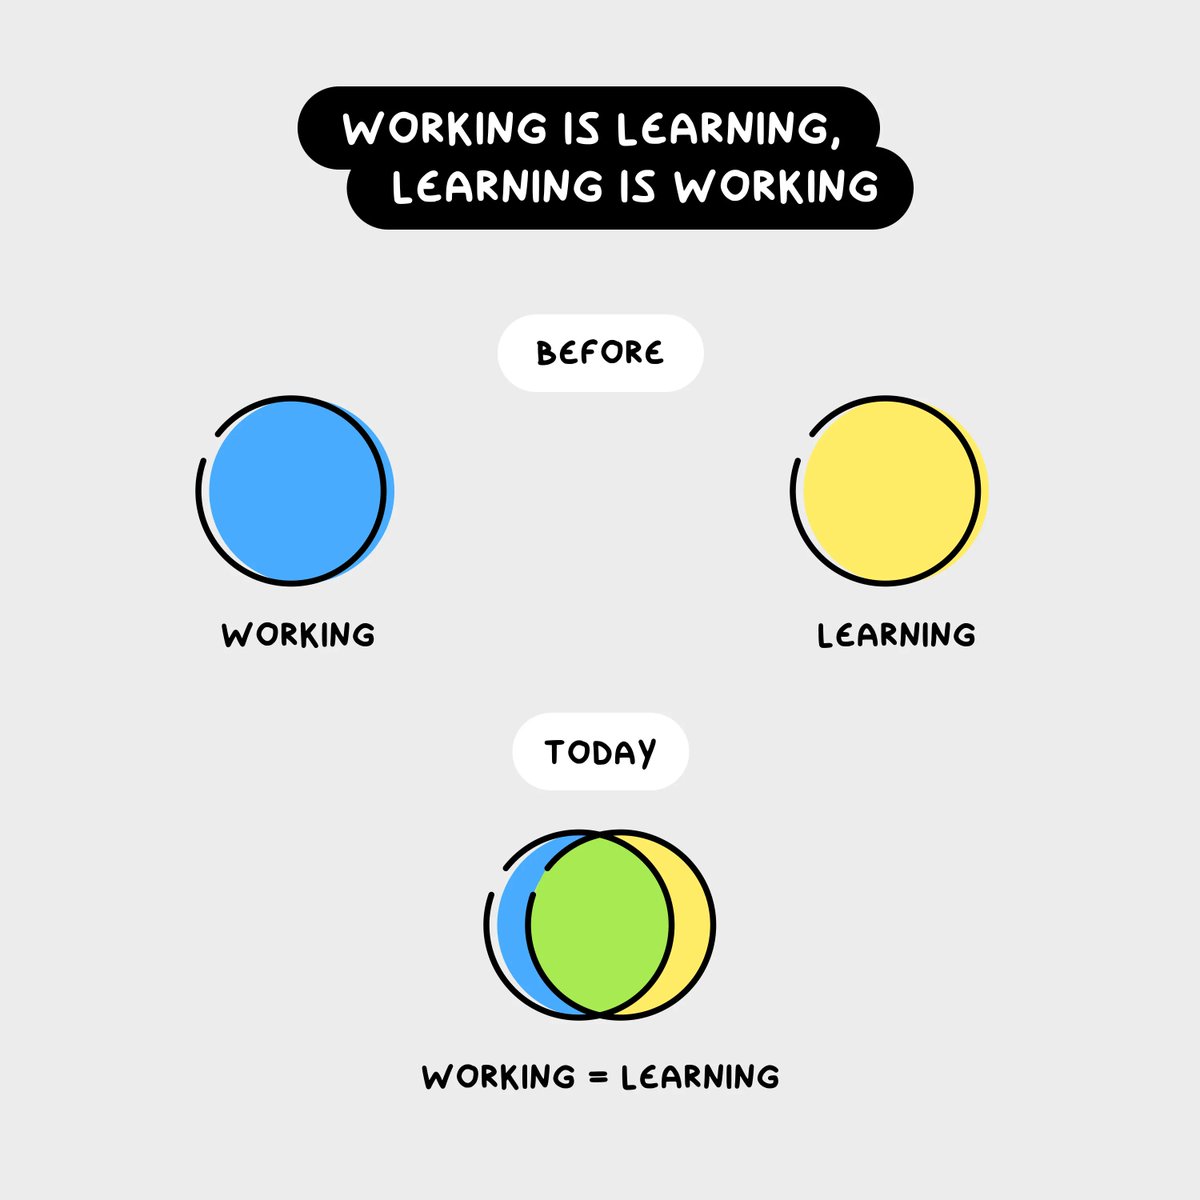 Working is learning, learning is working